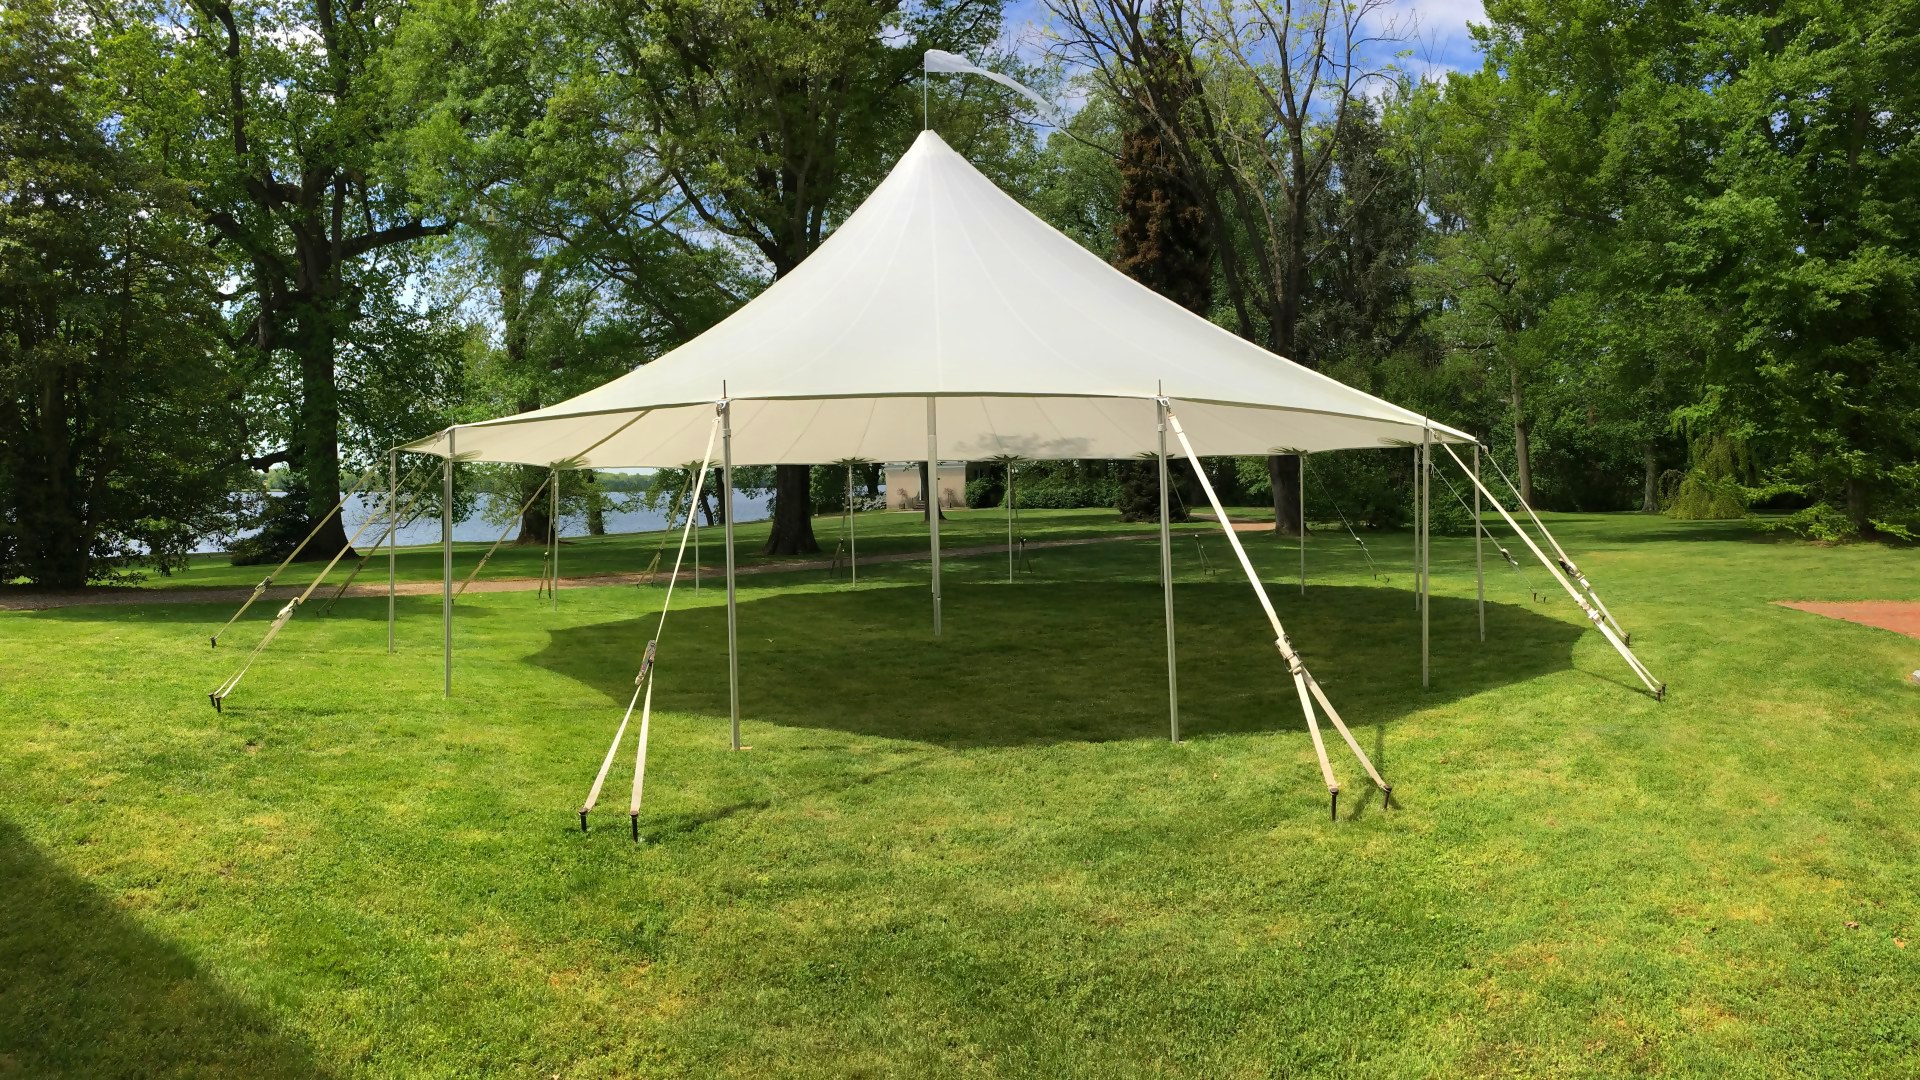 Beautiful sailcloth tent in Bethlehem, PA